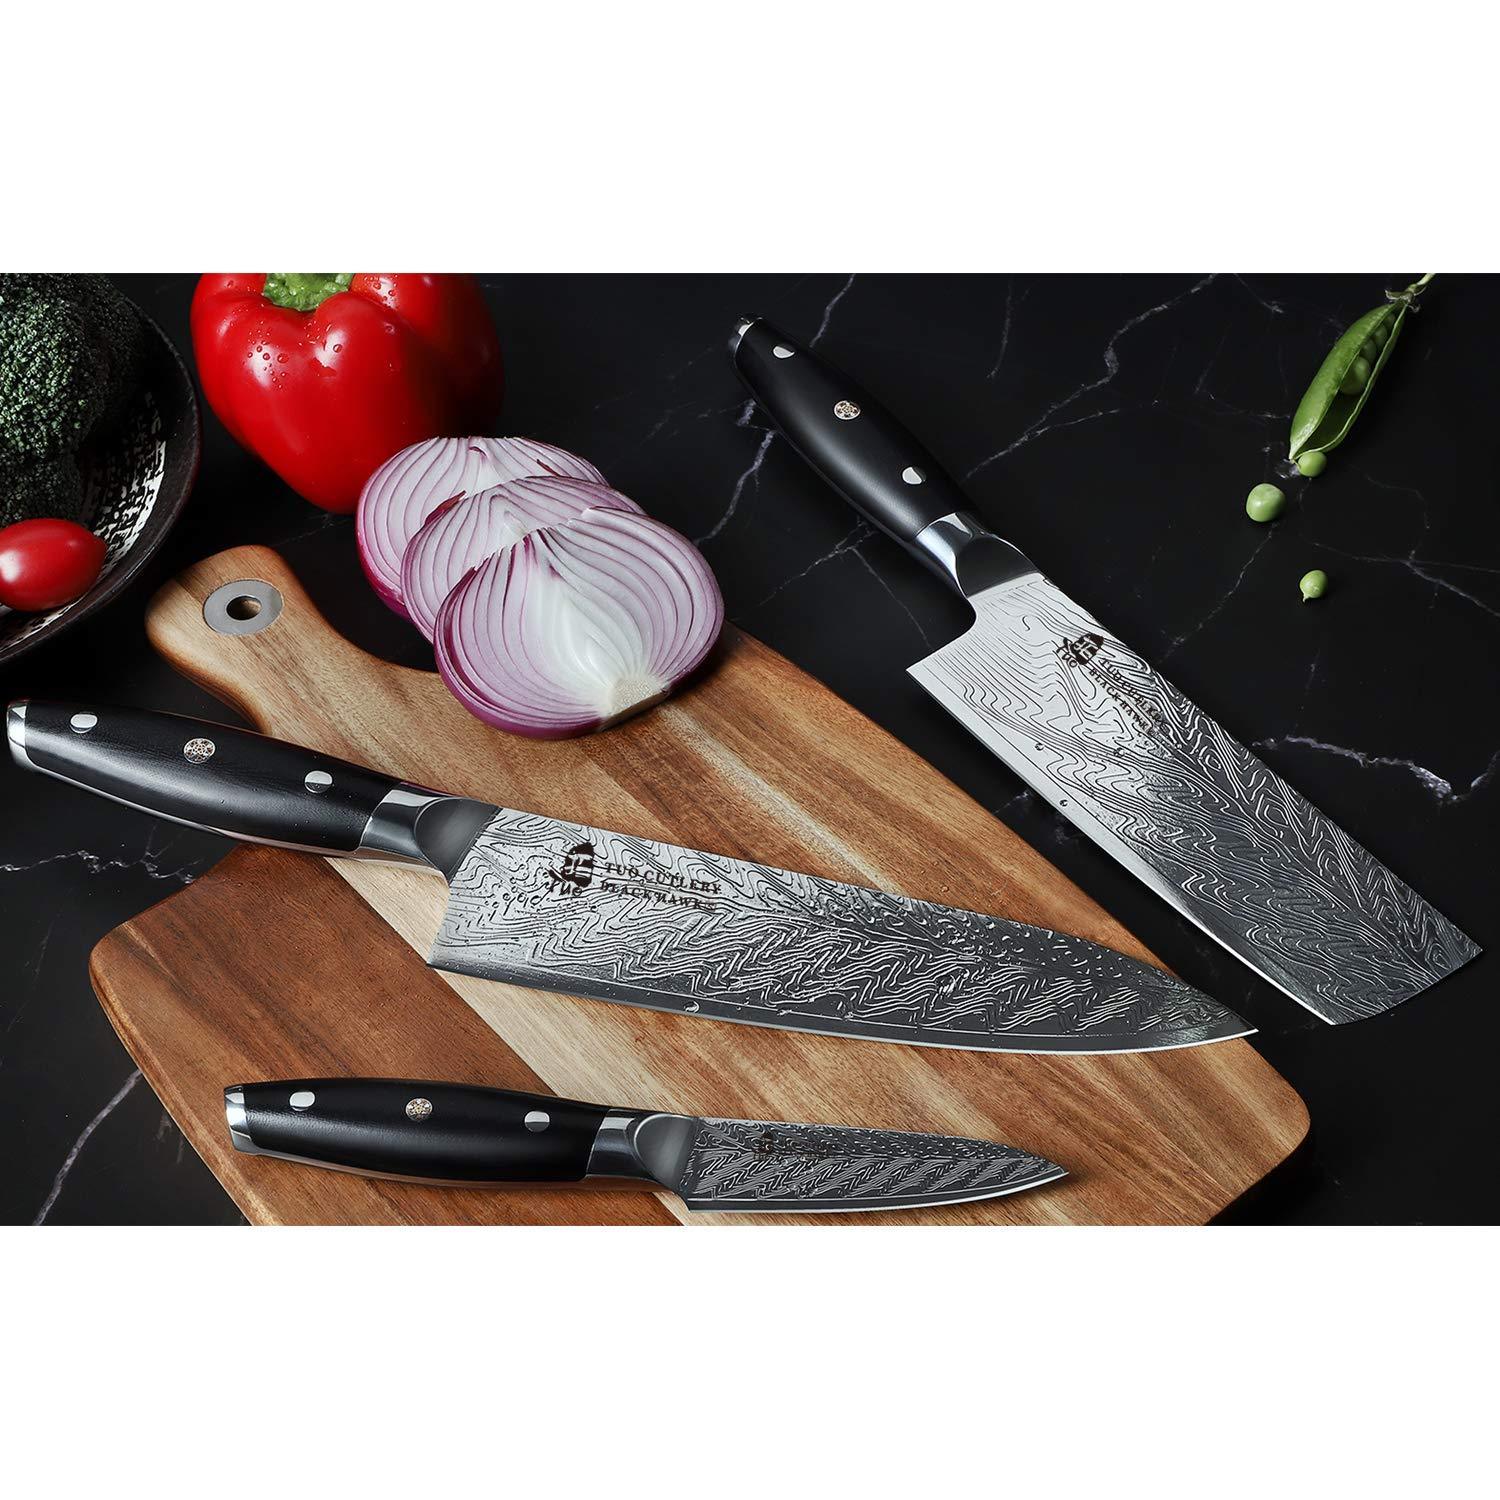 TUO Vegetable Meat Cleaver Knife - Chinese Chef's Knife 7-inch High Carbon  Stainless Steel - Kitchen Knife with G10 Full Tang handle - Black Hawk-S  Knives Including Gift Box 